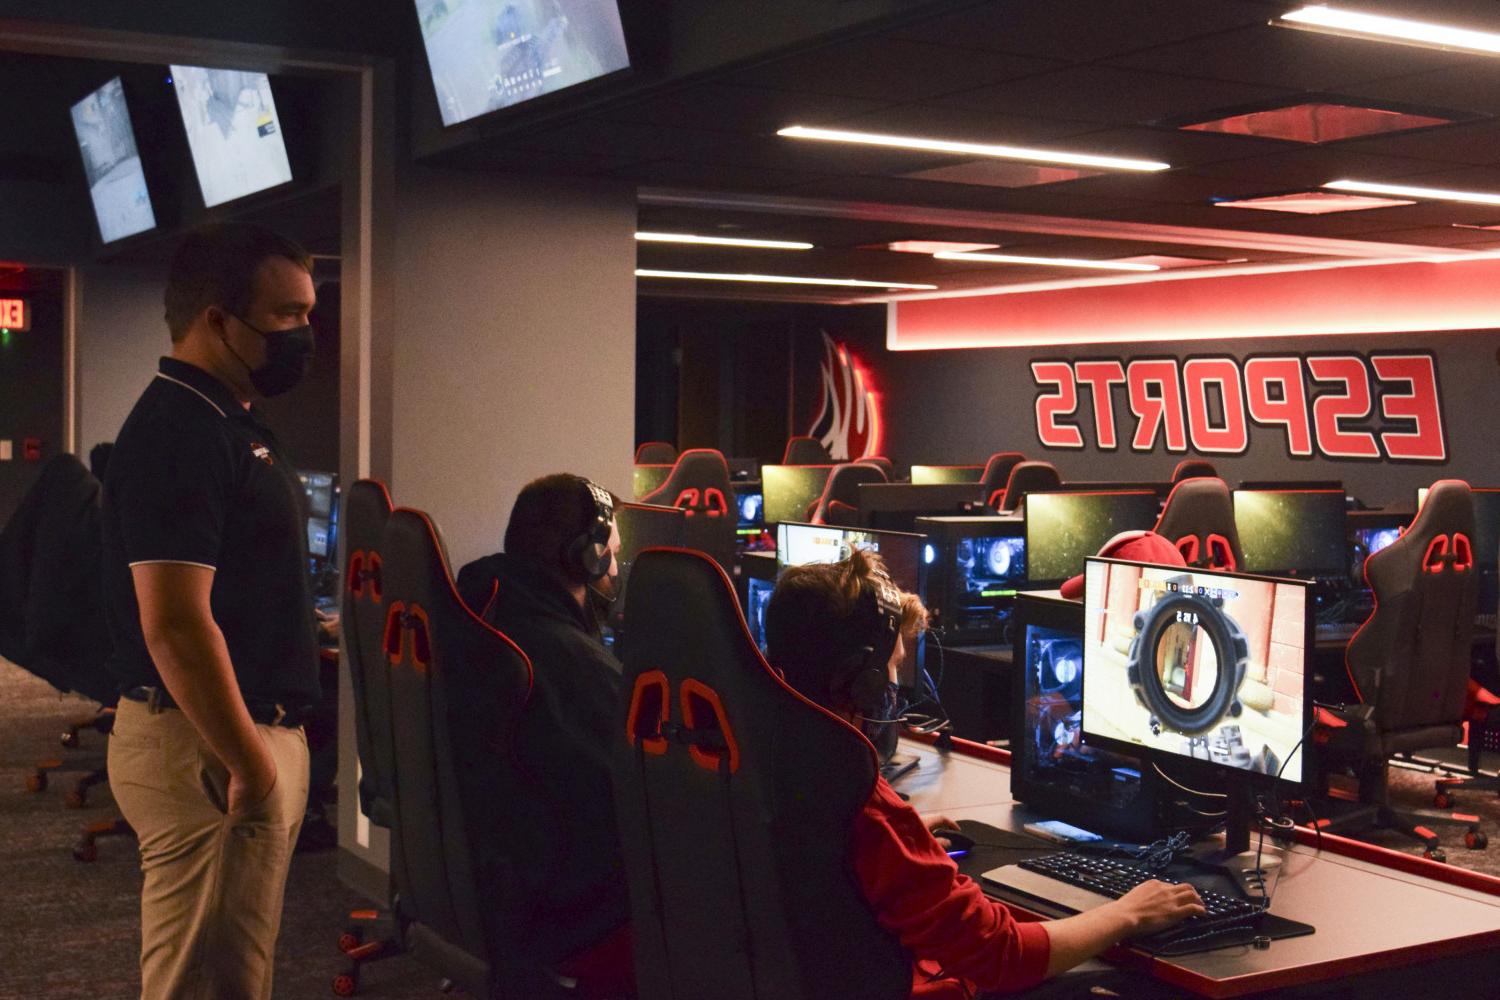 Maybe esports are more your style. Carthage has a new coed varsity team.